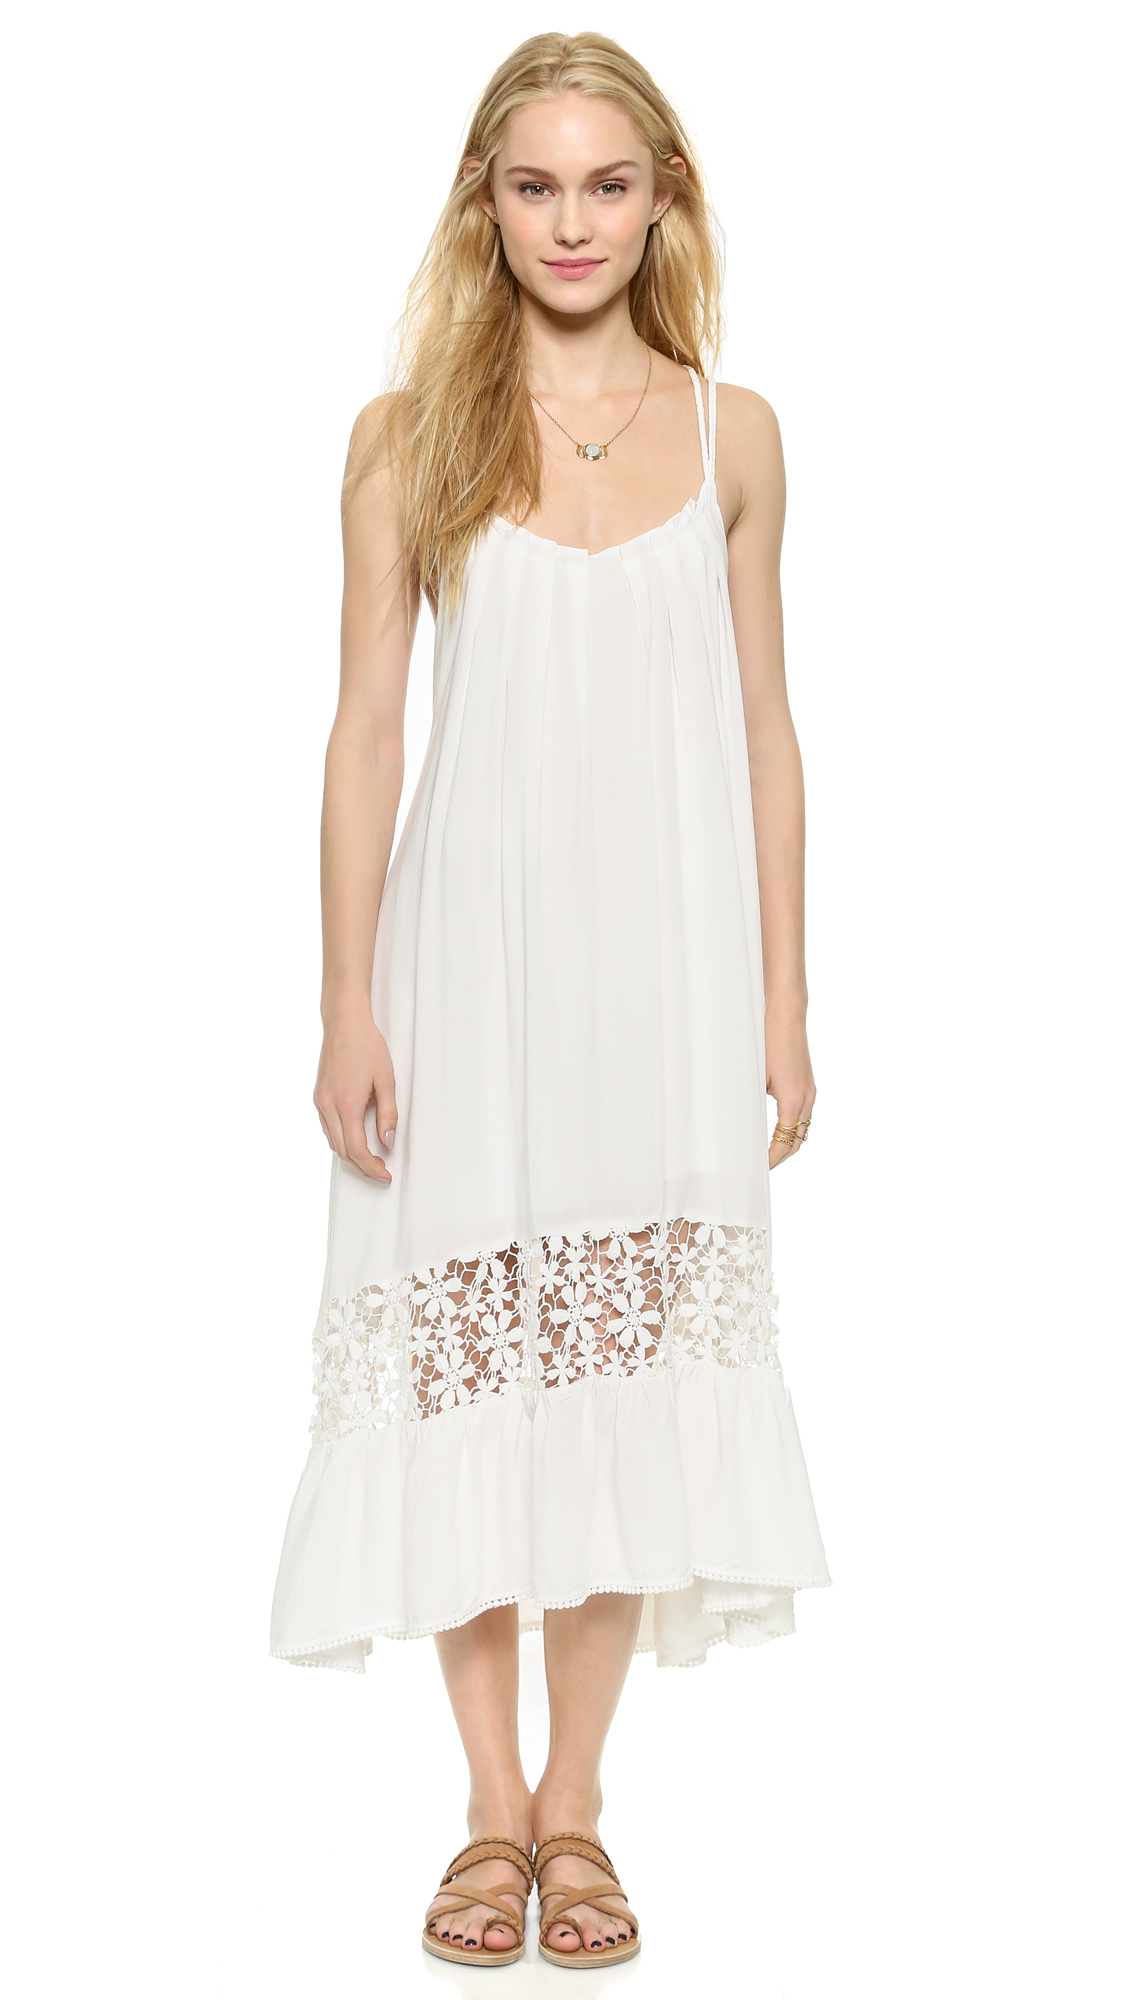 Lyst - 6 Shore Road By Pooja Festival Lace Dress - Moonlight White in White